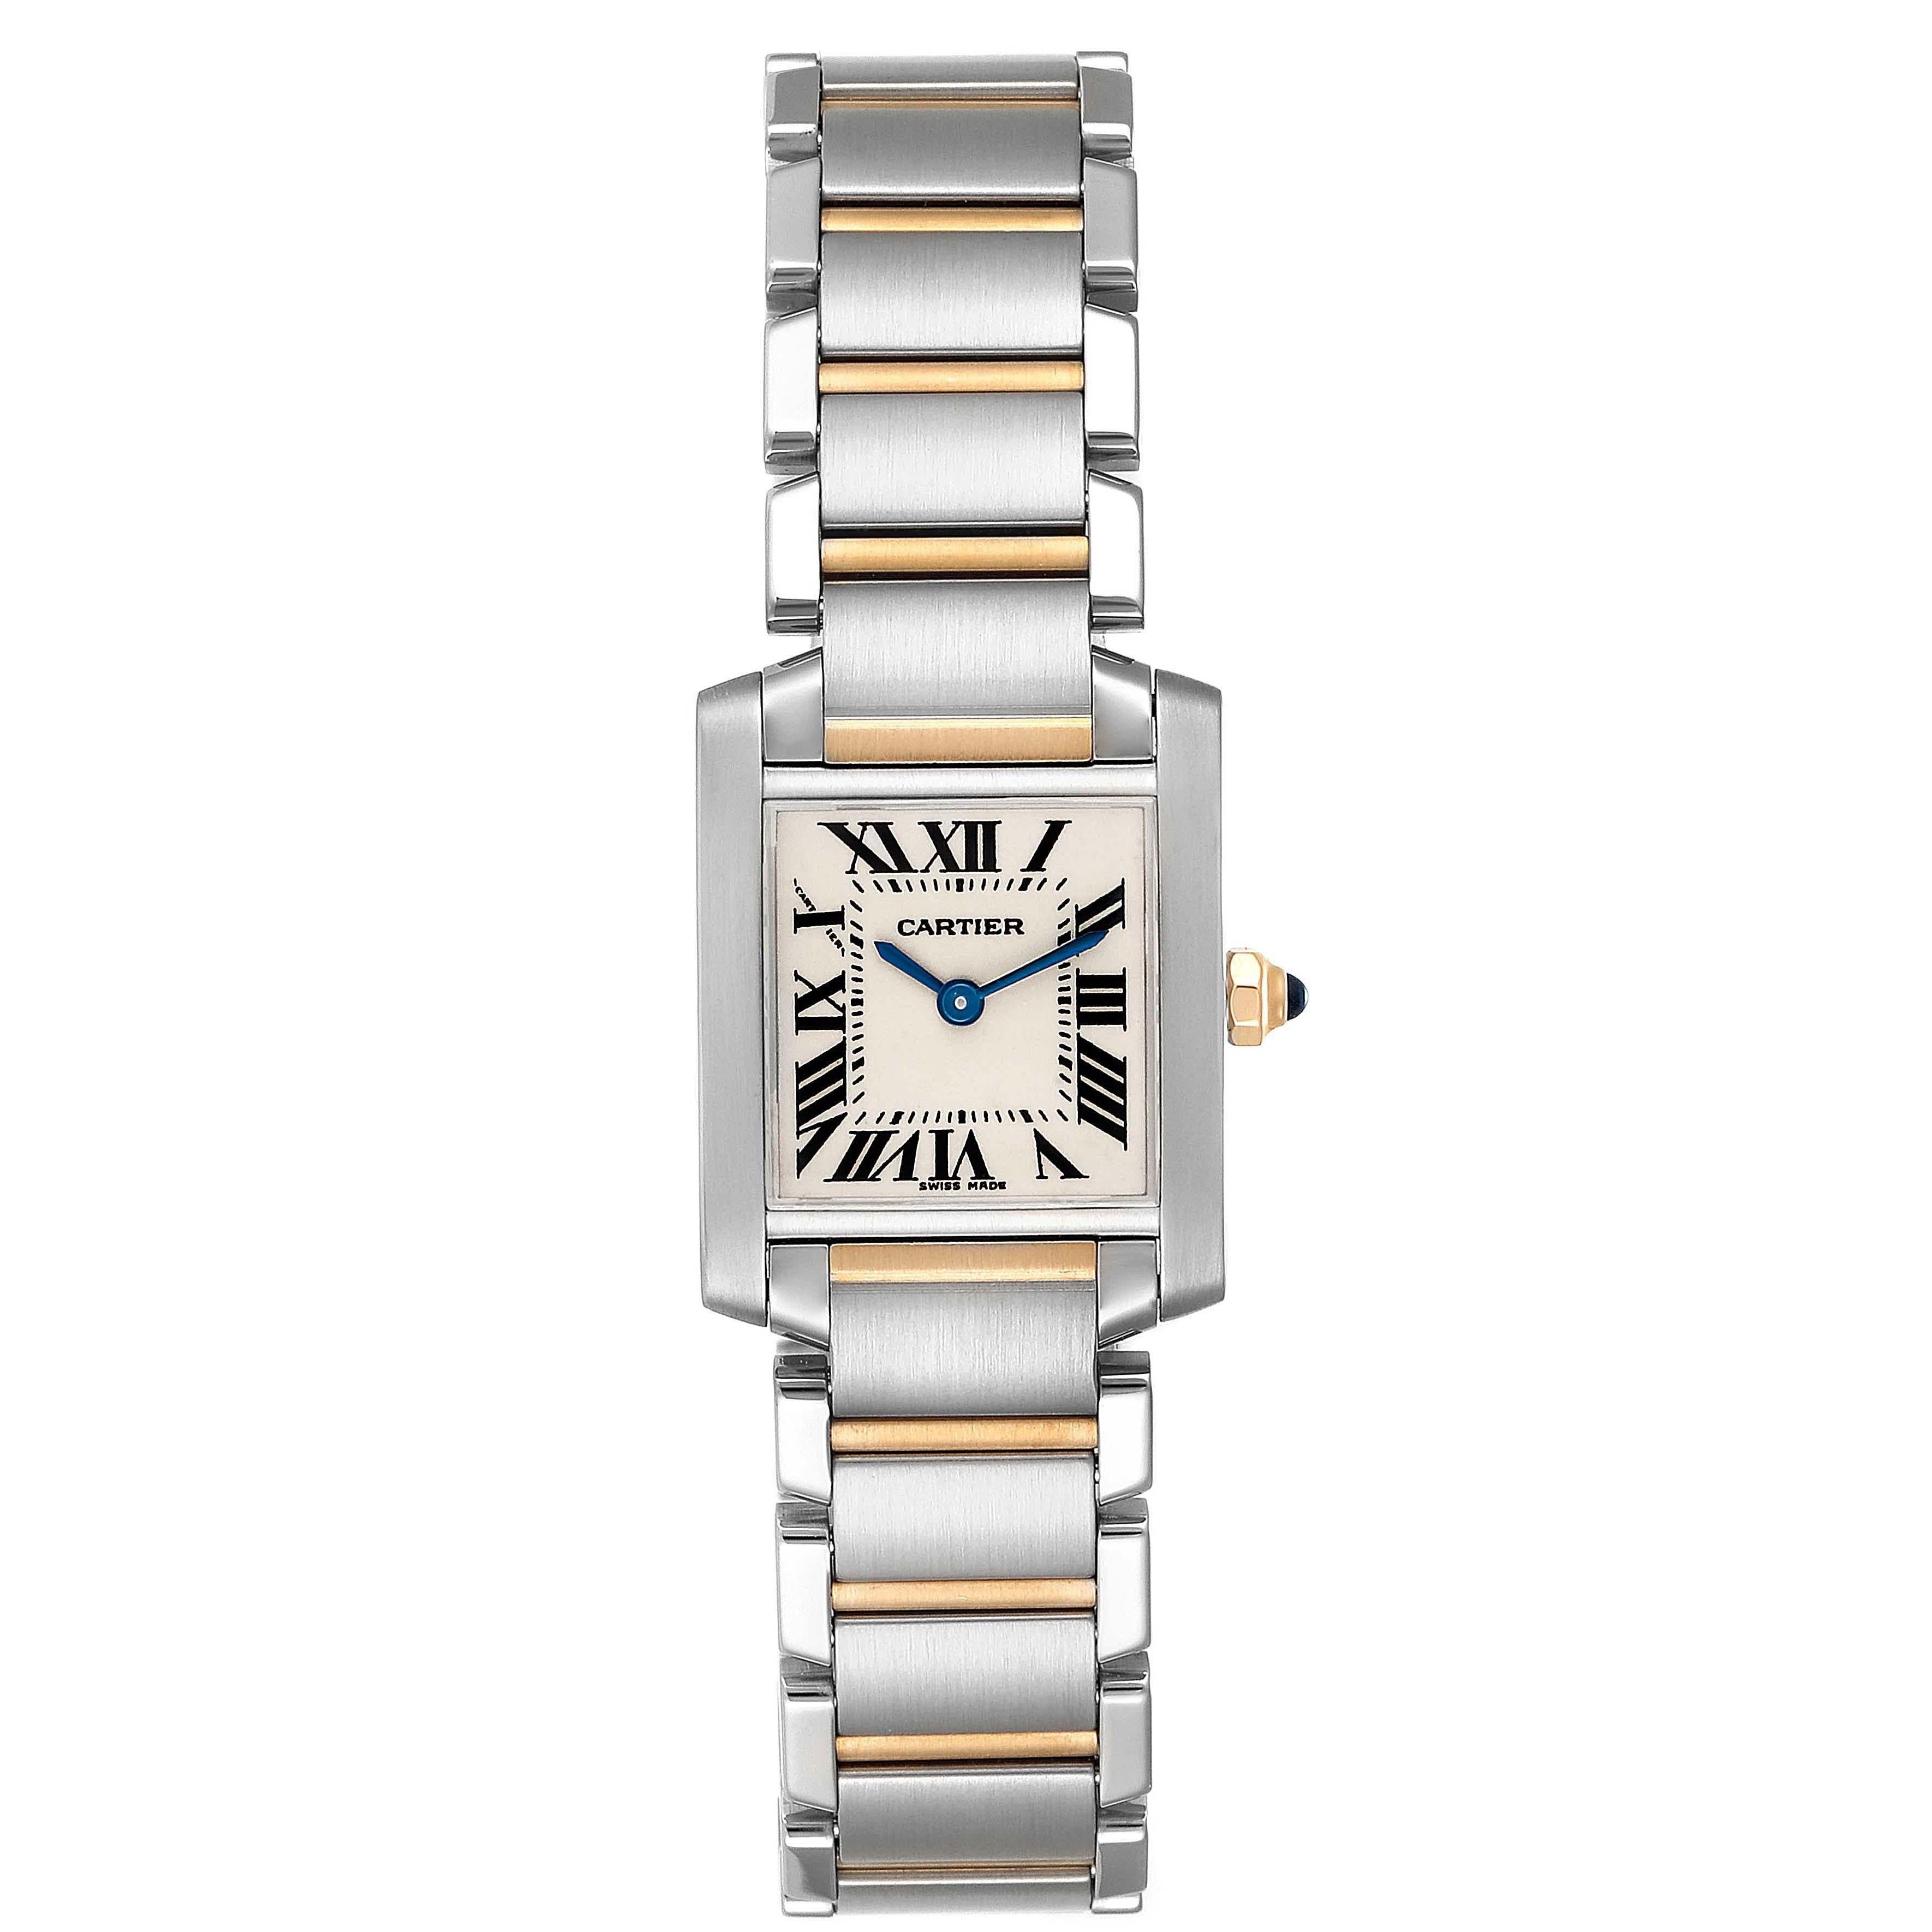 Cartier Tank Francaise Steel Yellow Gold Small Ladies Watch W51007Q4. Quartz movement. Rectangular stainless steel 20.0 x 25.0 mm case. Octagonal 18k yellow gold crown set with a blue spinel cabochon. . Scratch resistant sapphire crystal. Silver